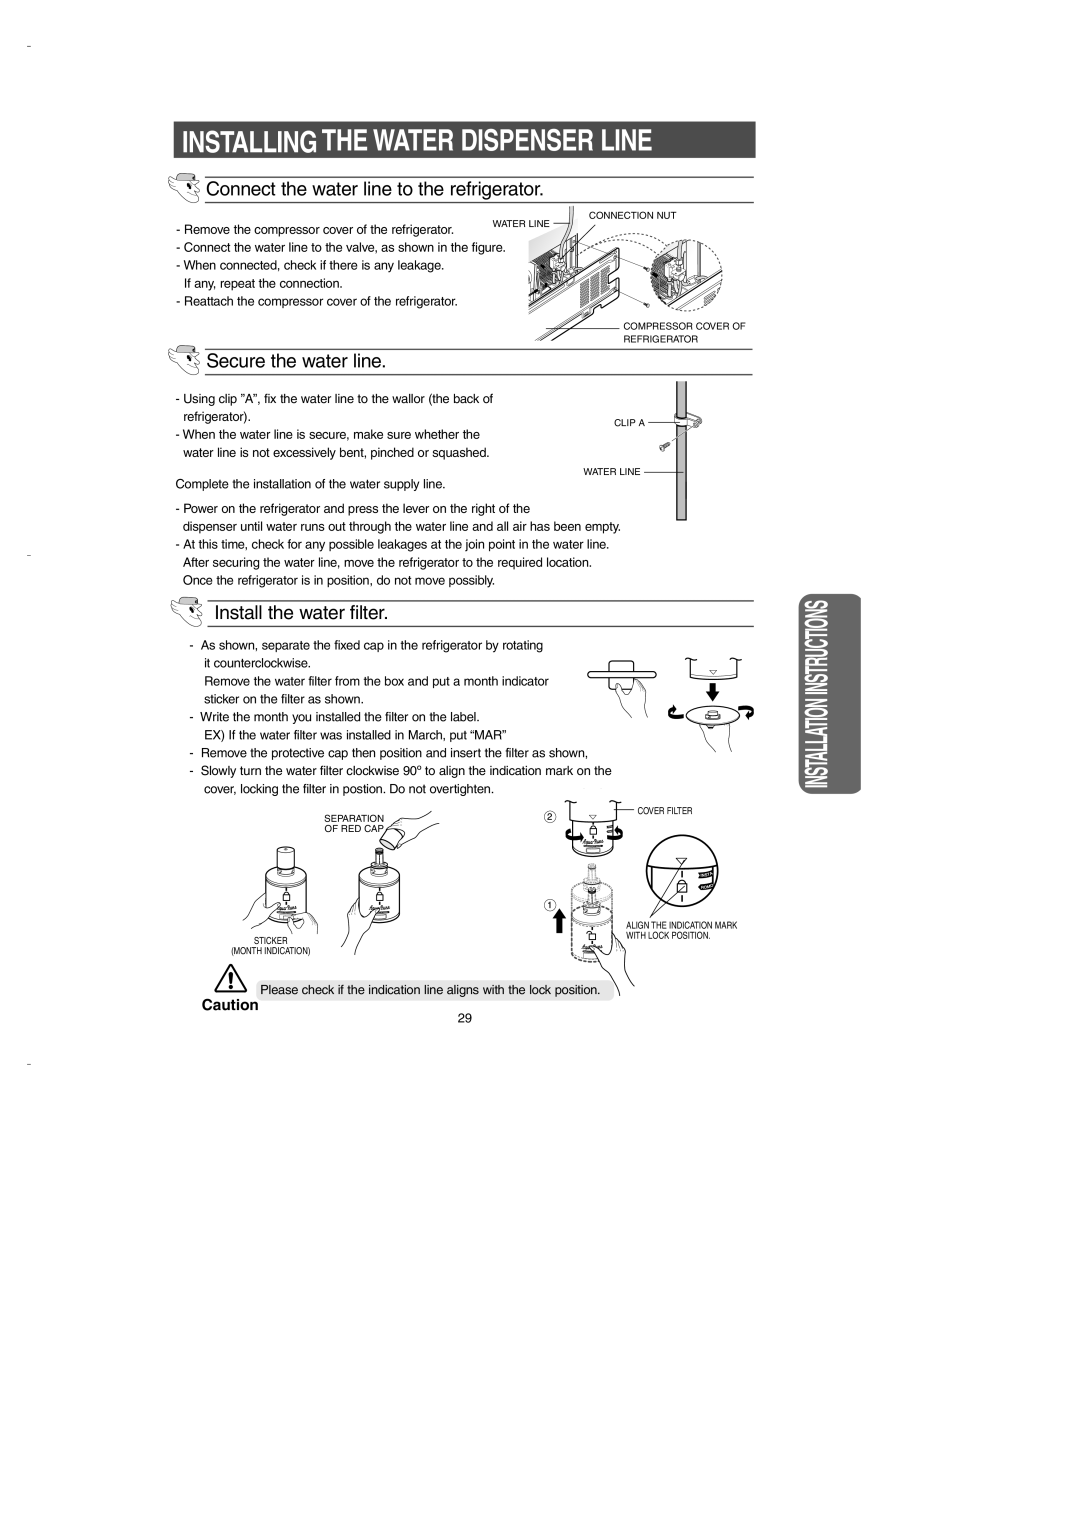 Samsung DA99-00275B owner manual Installing The Water Dispenser Line, Secure the water line, Install the water filter 